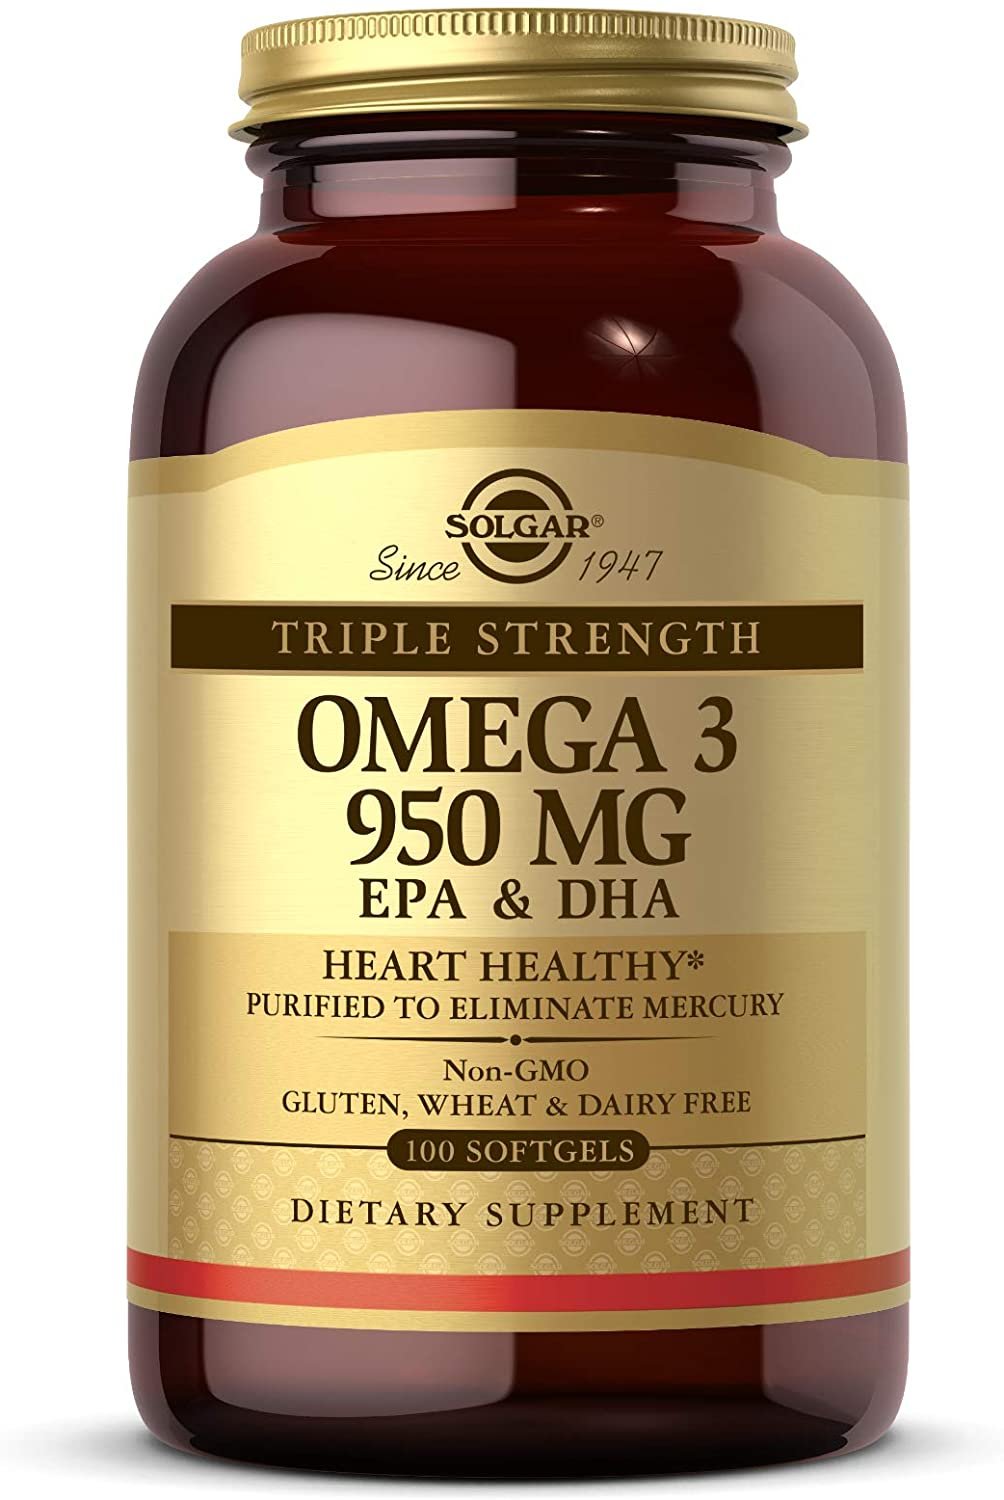 Solgar Triple Strength Omega-3 950 mg, 100 Softgels - Supports Cardiovascular, Joint & Skin Health - Heart Healthy Supplement - Essential Fatty Acids - Non GMO, Gluten Free, Dairy Free - 100 Servings